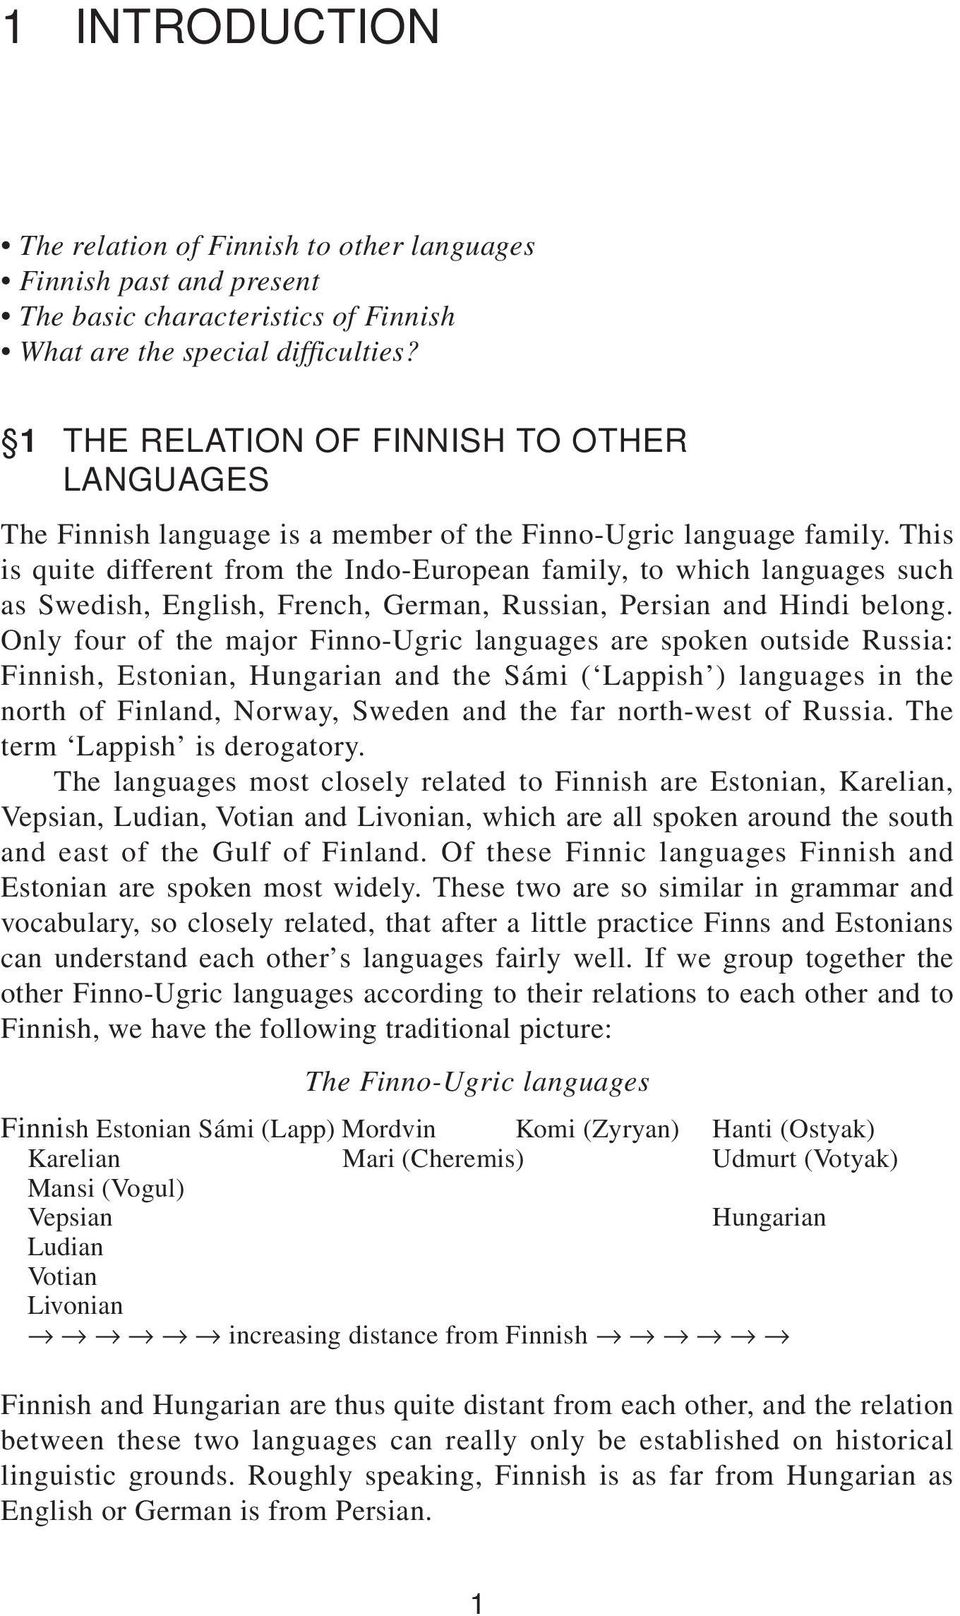 This is quite different from the Indo-European family, to which languages such as Swedish, English, French, German, Russian, Persian and Hindi belong.